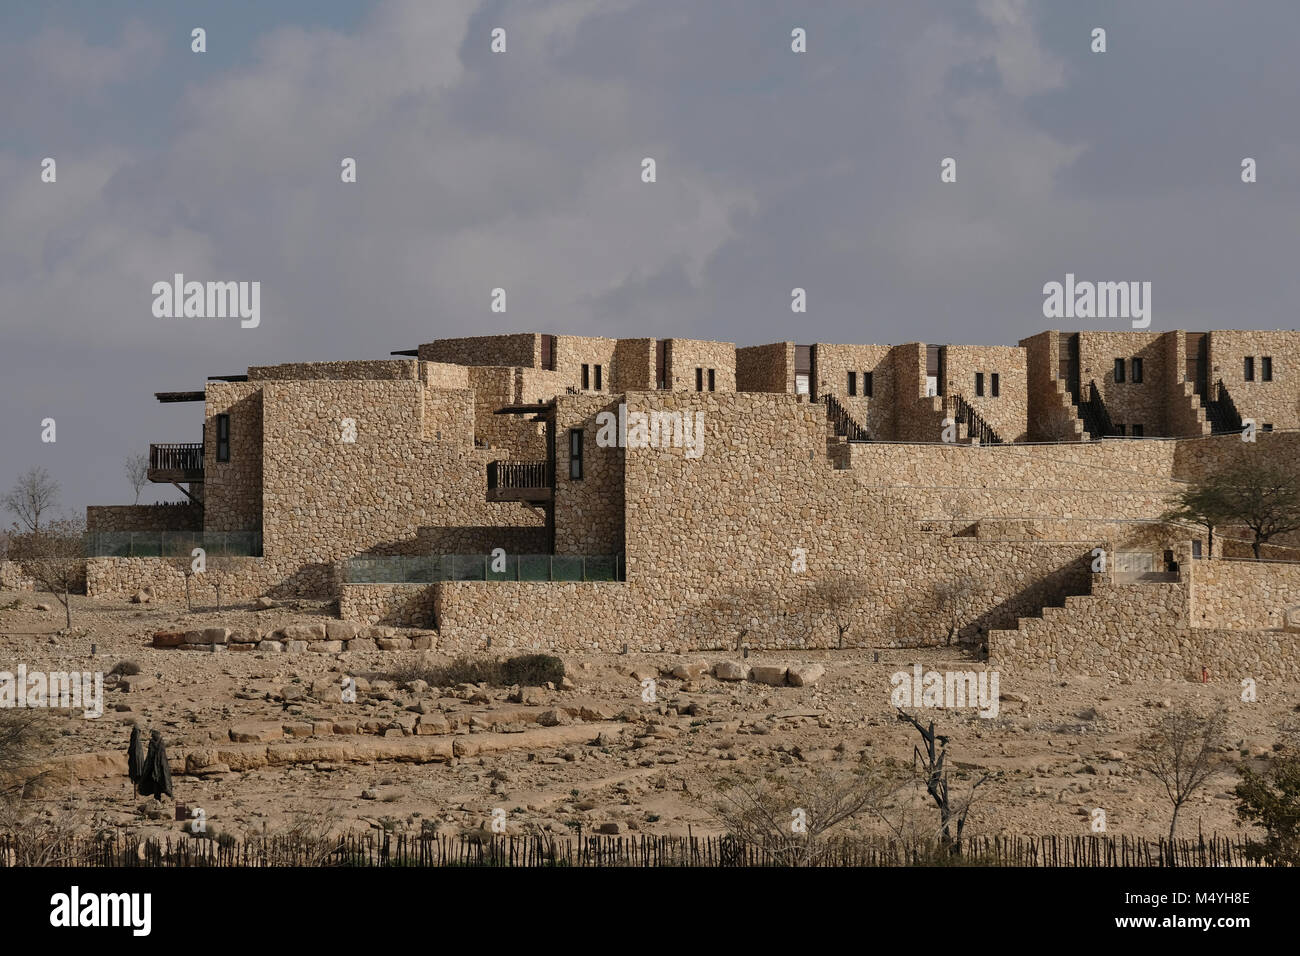 View of the Beresheet Hotel in a contemporary stone building located in the city of Mitzpe Ramon southern Israel Stock Photo